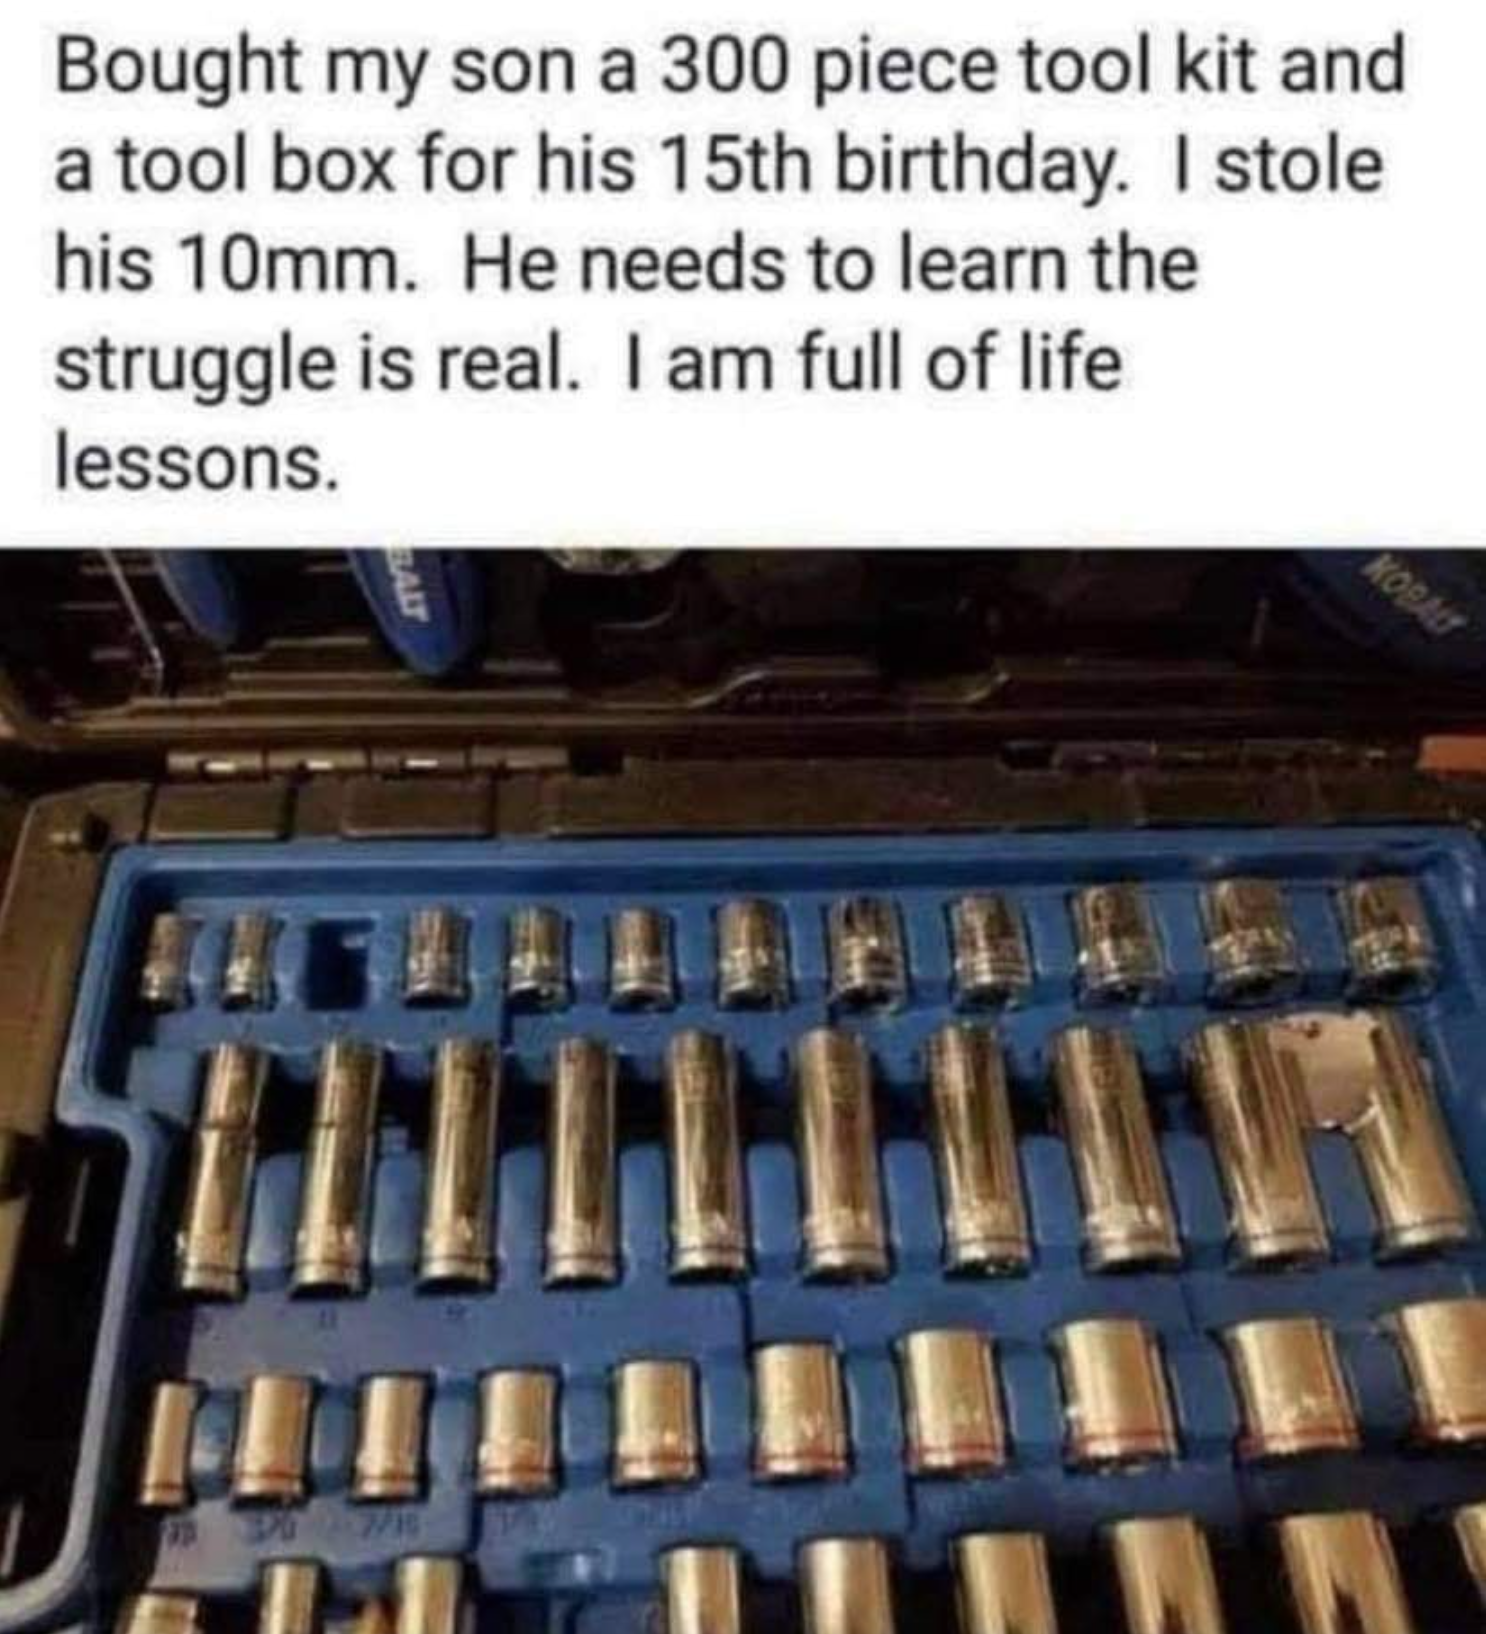 metal - Bought my son a 300 piece tool kit and a tool box for his 15th birthday. I stole his 10mm. He needs to learn the struggle is real. I am full of life lessons. 11